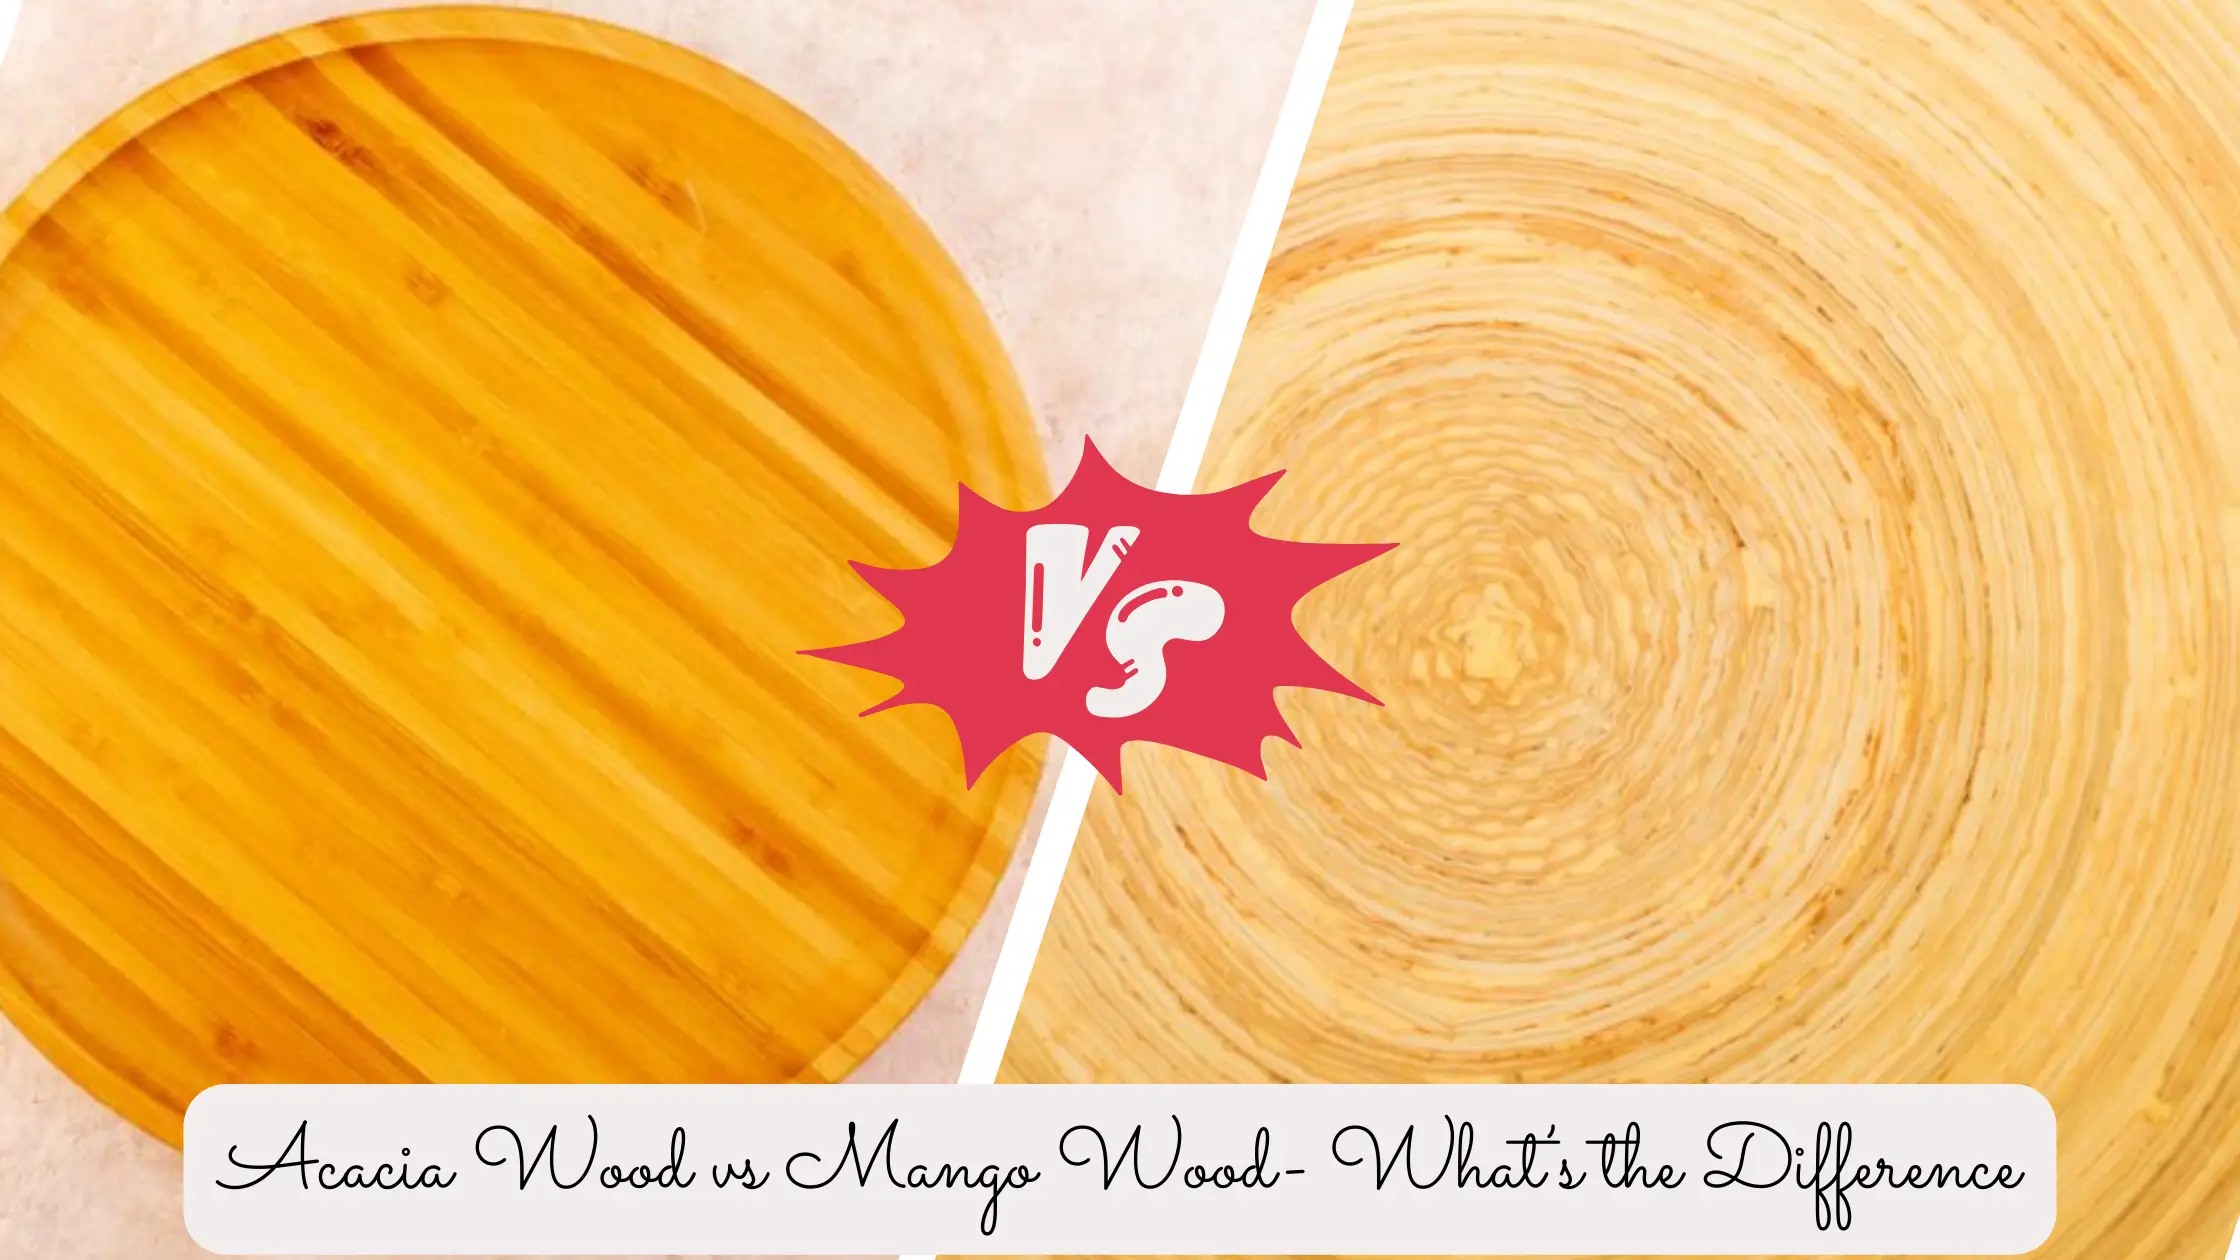 Acacia Wood vs Mango Wood- What’s the Difference-SURENSPACE